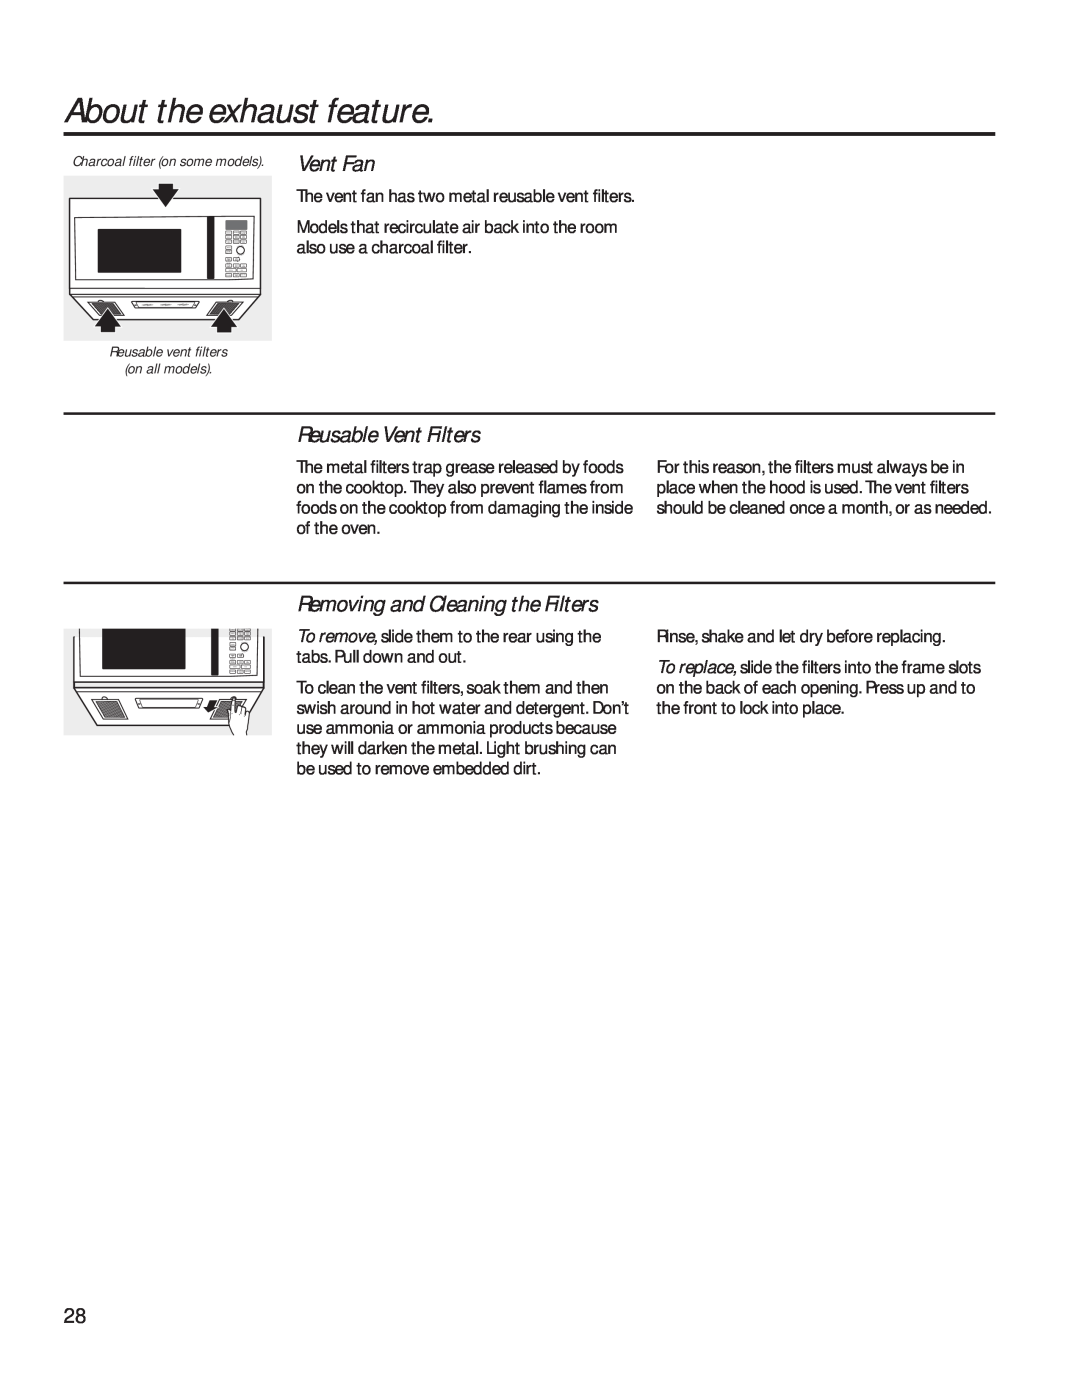 GE PVM9179 owner manual About the exhaust feature, Reusable Vent Filters, Removing and Cleaning the Filters, Vent Fan 